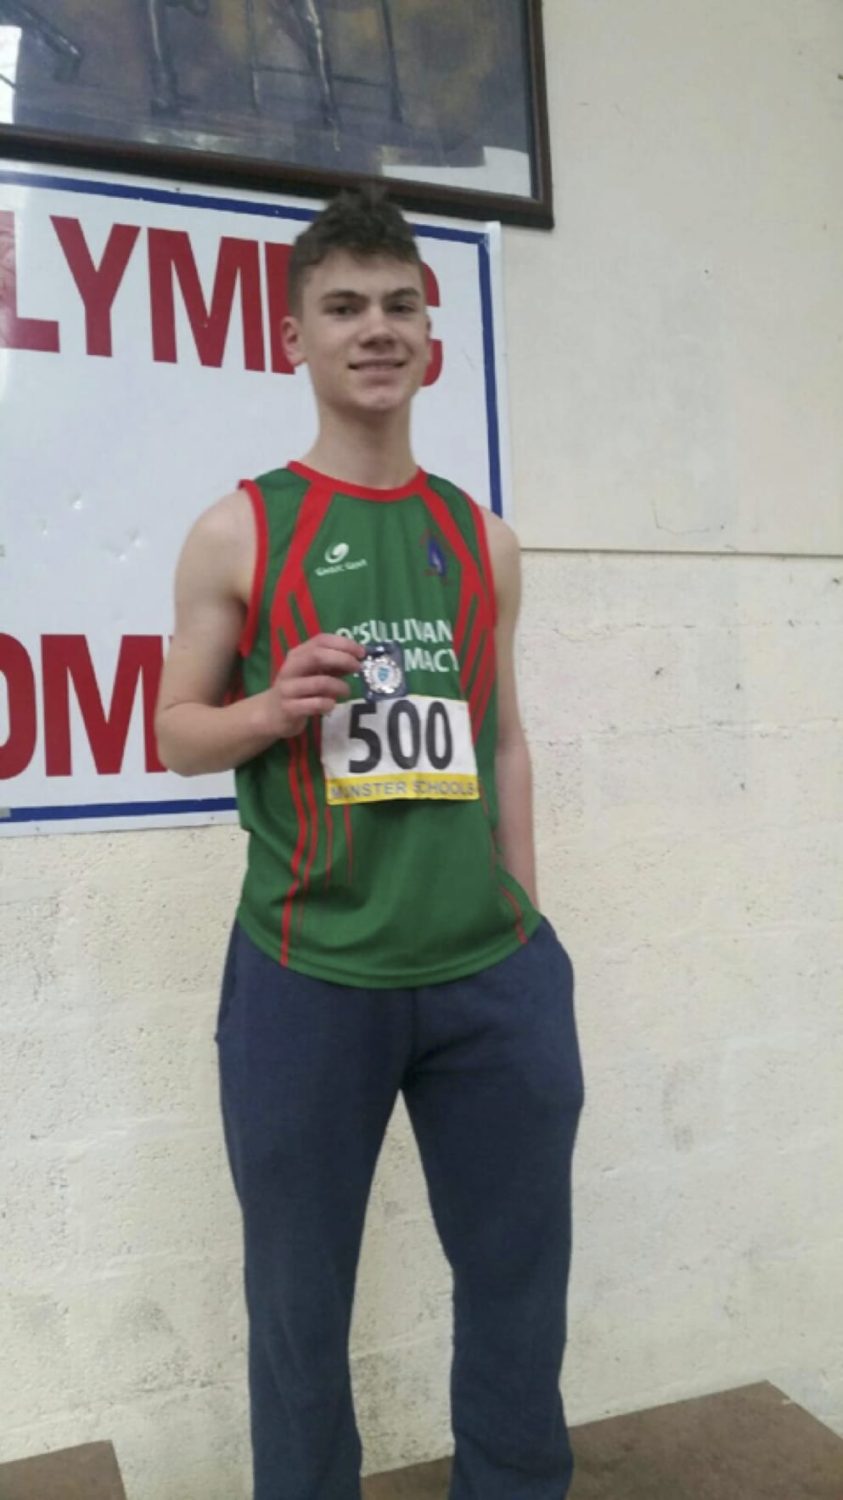 March 2017: Desmond College 2nd year student, Nathan Wright, won silver in the North Munster Indoor Championship Long Jump, setting a personal best of 5.52 meters